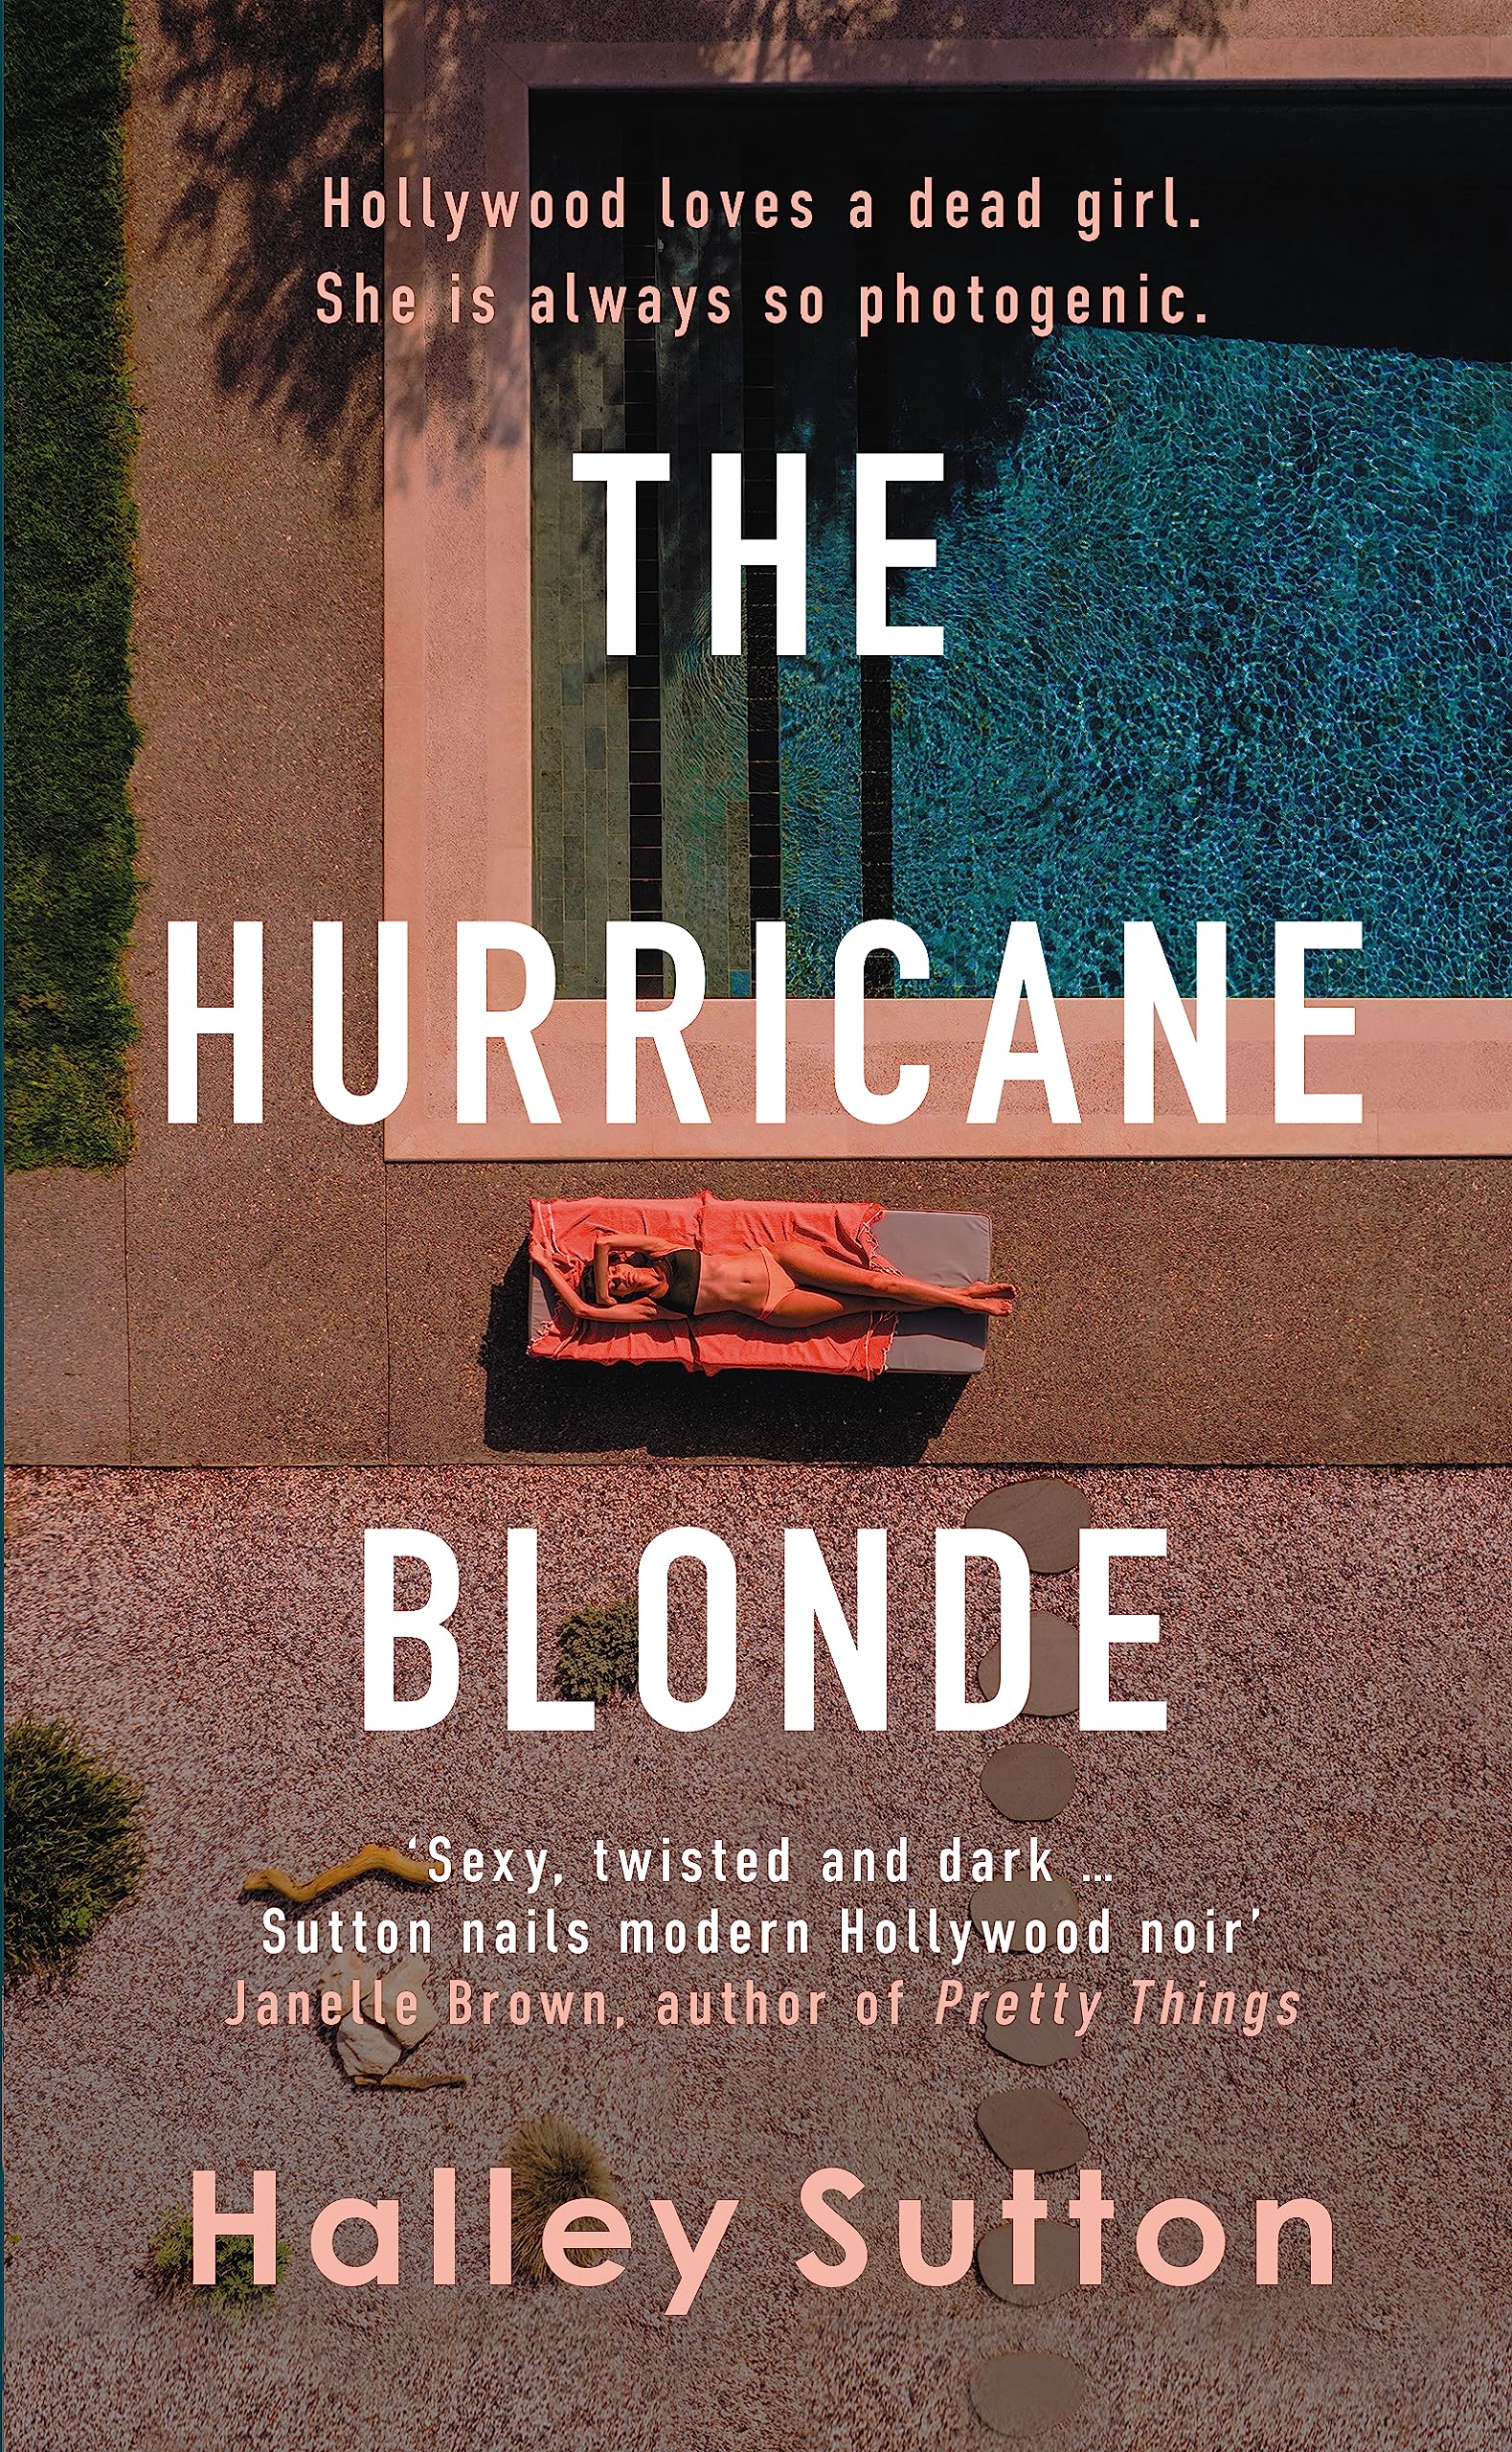 The_Hurricane_Blonde_book_cover